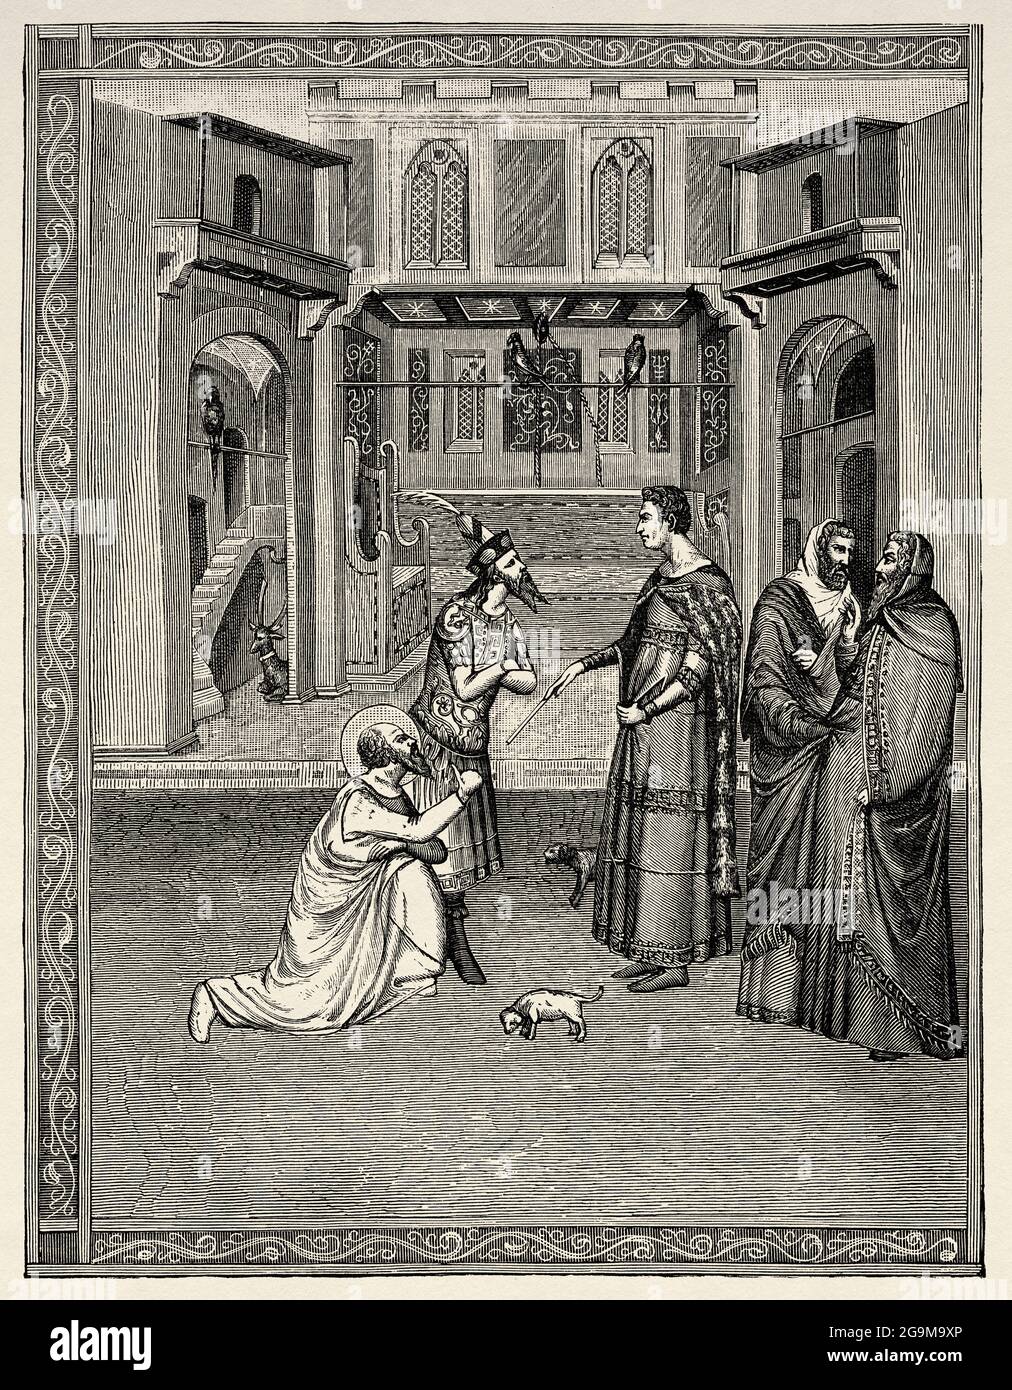 Joseph of Arimathea Before Pilate. Joseph of Arimathea accompanied by Nicodemus they are going to ask Pilate for the body of Jesus Christ to be buried, fourteenth century engraving. Old 19th century engraved illustration from Jesus Christ by Veuillot 1881 Stock Photo